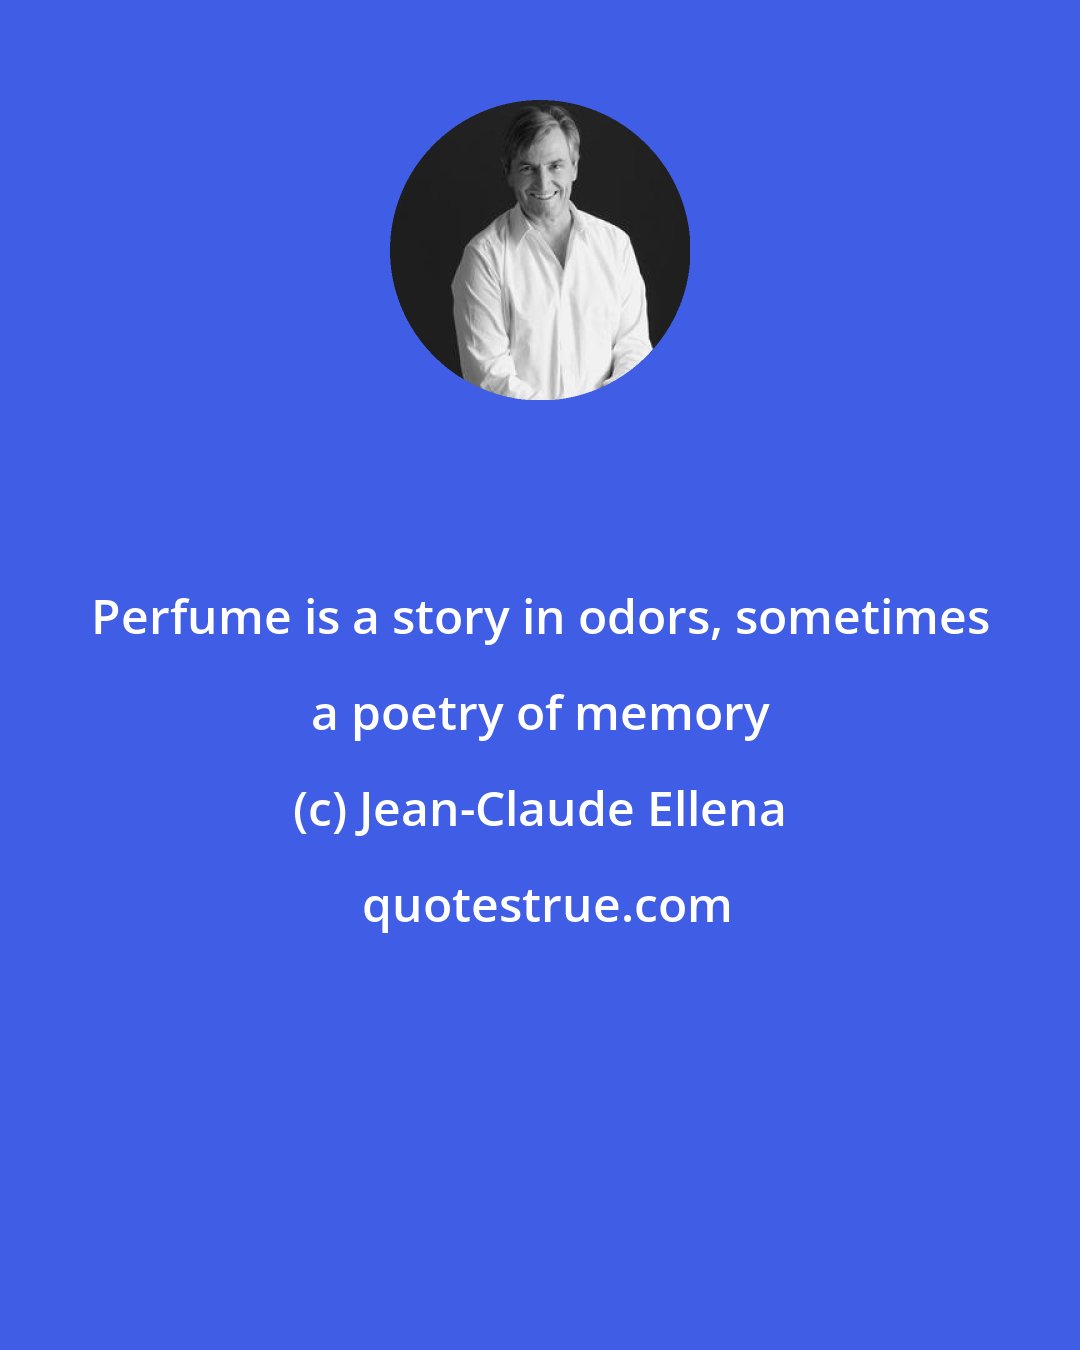 Jean-Claude Ellena: Perfume is a story in odors, sometimes a poetry of memory